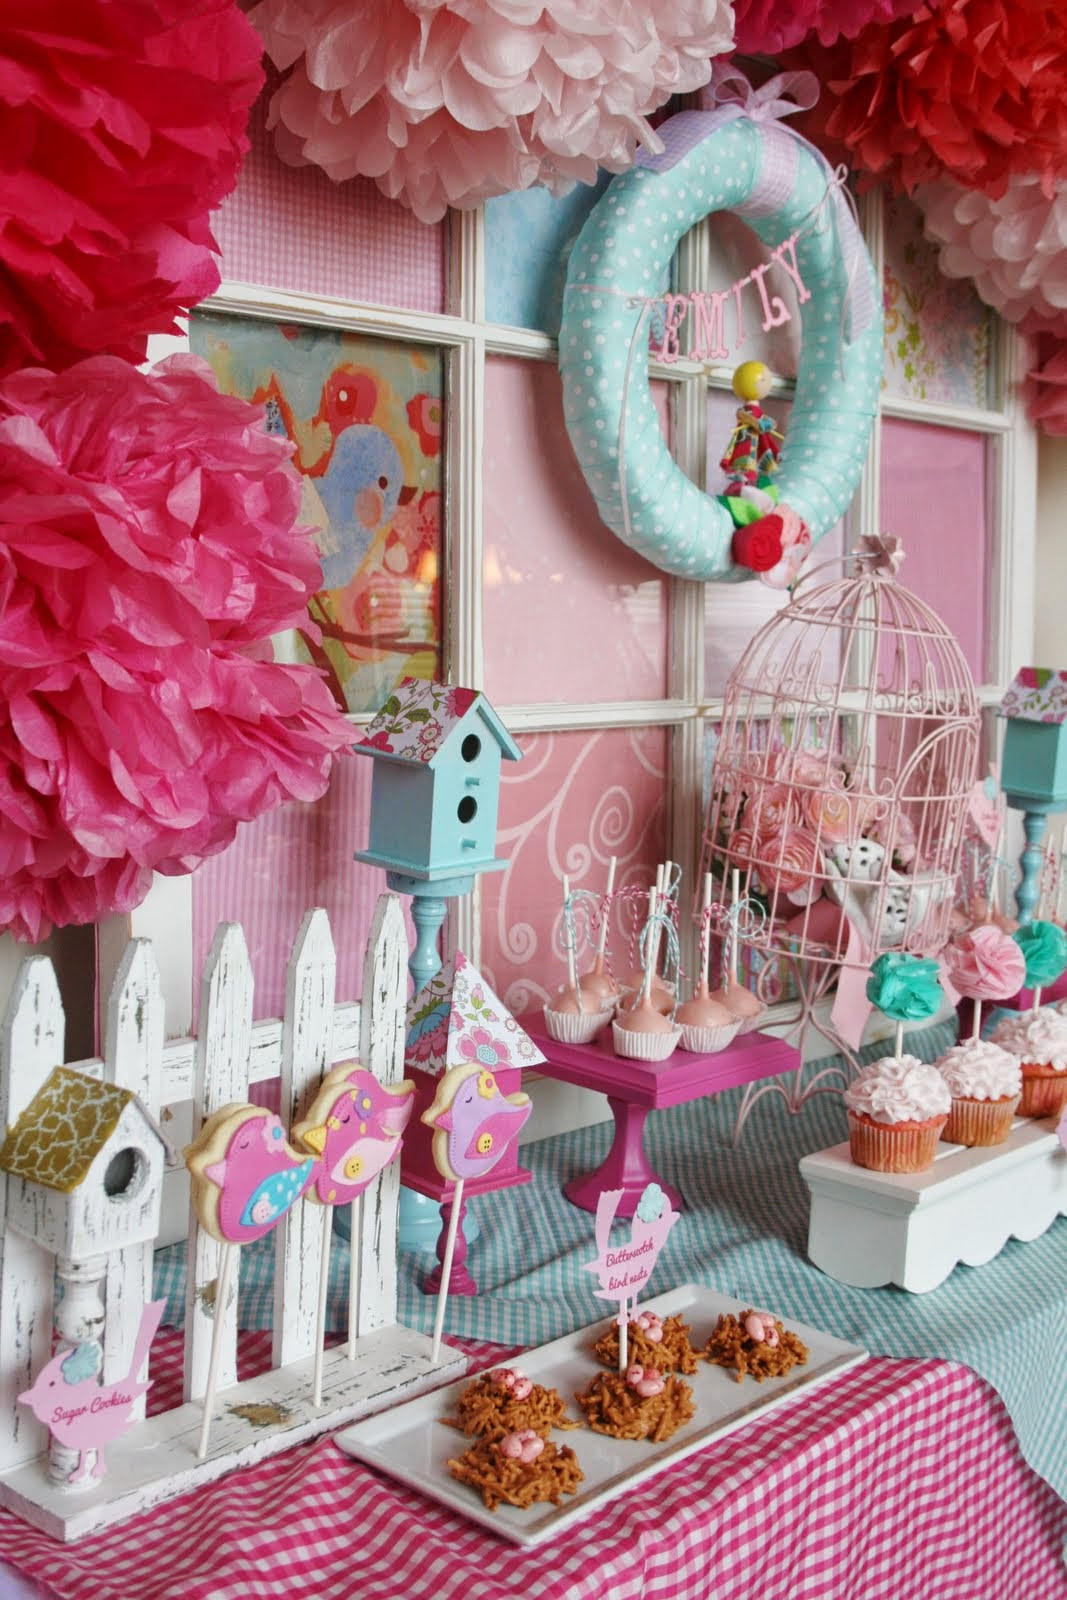 Decorating Ideas For Girl Baby Shower
 All About Women s Things Baby Shower Decorating Ideas For